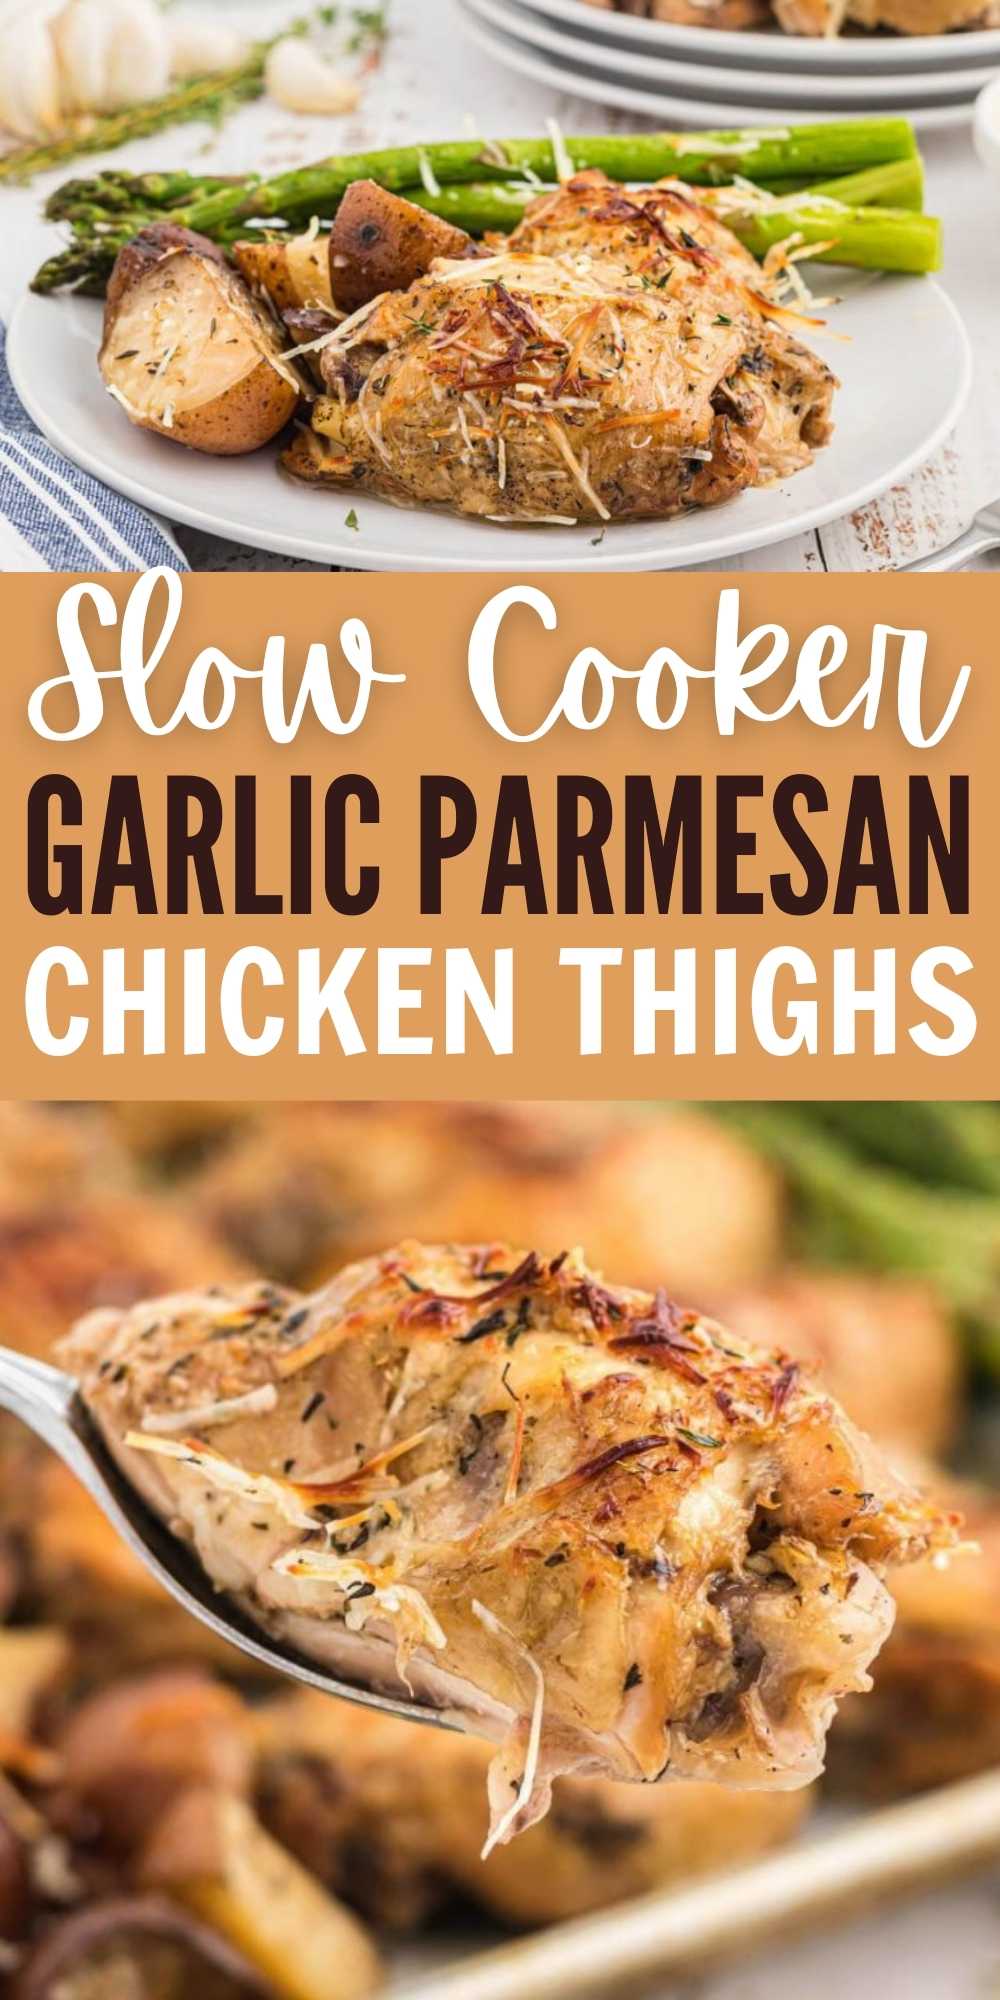 Make Slow Cooker Garlic Parmesan Chicken Thighs Dinner for a meal your family will love. Crockpot garlic chicken thighs and potatoes is an easy meal idea. #eatingonadime #slowcooker #garlicchickenthighs #parmesanchickenthighs